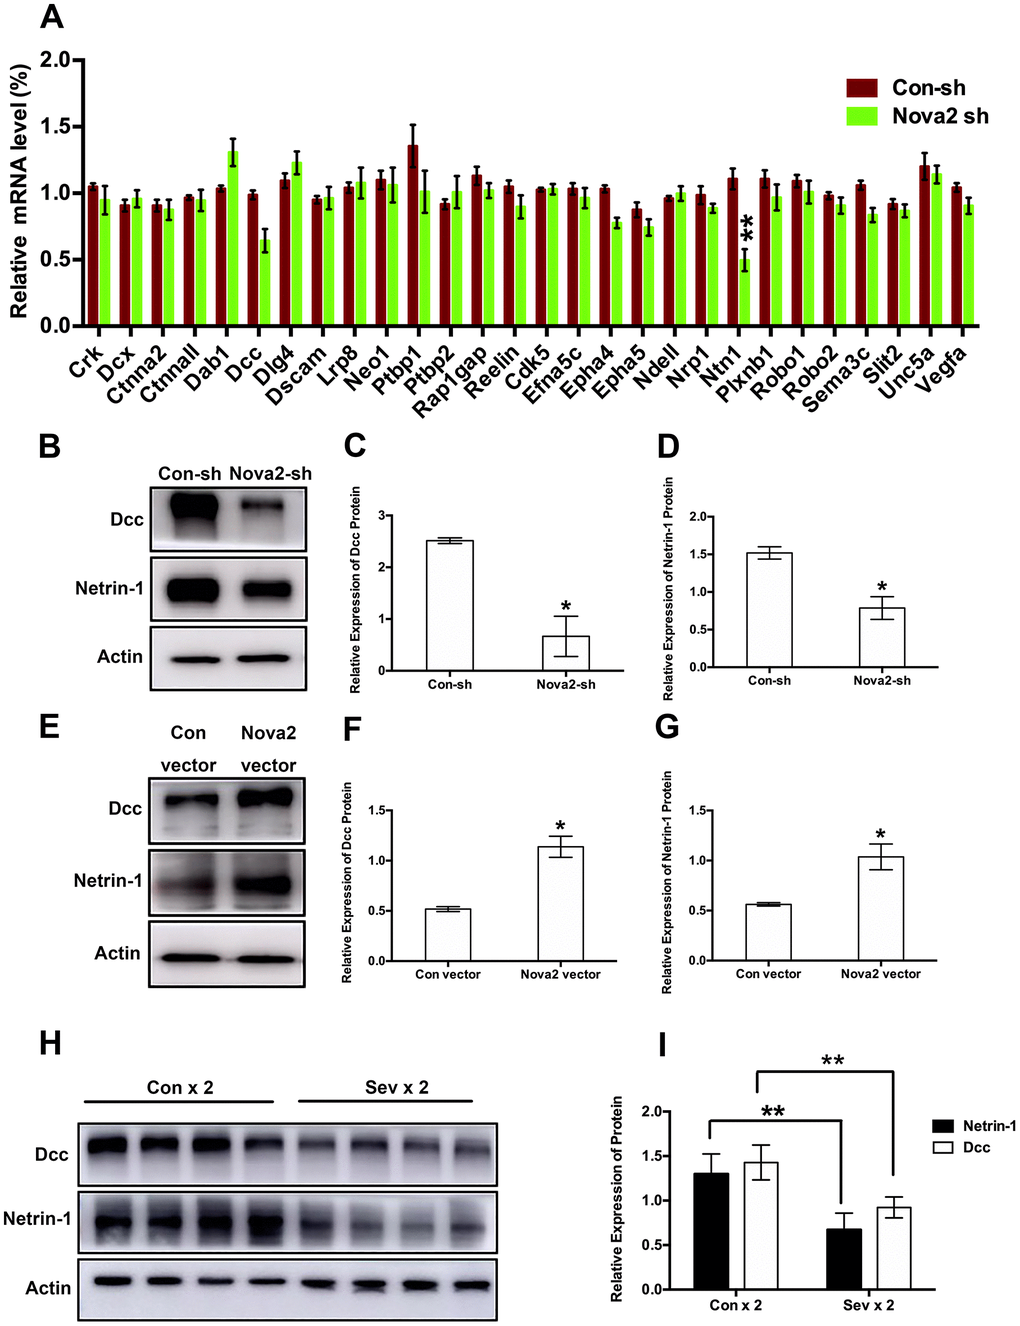 Both Nova2 knockdown and dual sevoflurane exposure suppressed Netrin-1/Dcc protein expression. (A) QPCR revealed that Netrin-1 mRNA expression was decreased among 28 candidate genes in the Nova2 shRNA group (F = 0.76, P = 0.0015**, N = 3, Student’s t-test), while Dcc mRNA expression wasn’t change (F = 0.699, P = 0.0519, N = 3, Student’s t-test). (B) Western blot analysis demonstrated that Nova2 knockdown suppressed Dcc and Netrin-1 proteins expressions. (C) Quantification of the protein expression of Dcc relative to Actin (P = 0.0217*, N = 3, Student’s t-test). (D) Quantification of the protein expression of Netrin-1 relative to Actin (P = 0.0264*, N = 3, Student’s t-test). (E) Western blot analysis demonstrated that Nova2 OE upregulated Dcc and Netrin-1 protein expressions in the cortical tissues of offspring mice. (F) Quantification of the protein expression of Dcc relative to Actin (P = 0.0148*, N = 3, Student’s t-test). (G) Quantification of the protein expression of Netrin-1 relative to Actin (P = 0.0353*, N = 3, Student’s t-test). (H) Western blot analysis demonstrated that dual sevoflurane exposure also decreased Dcc and Netrin-1 proteins expressions. (I) Quantification of the protein expressions of Dcc (F = 1.118, P = 0.0044**, N = 3, Student’s t-test) and Netrin-1 (F = 0.386, P = 0.0052**, N = 3, Student’s t-test) relative to Actin. *PPPP 